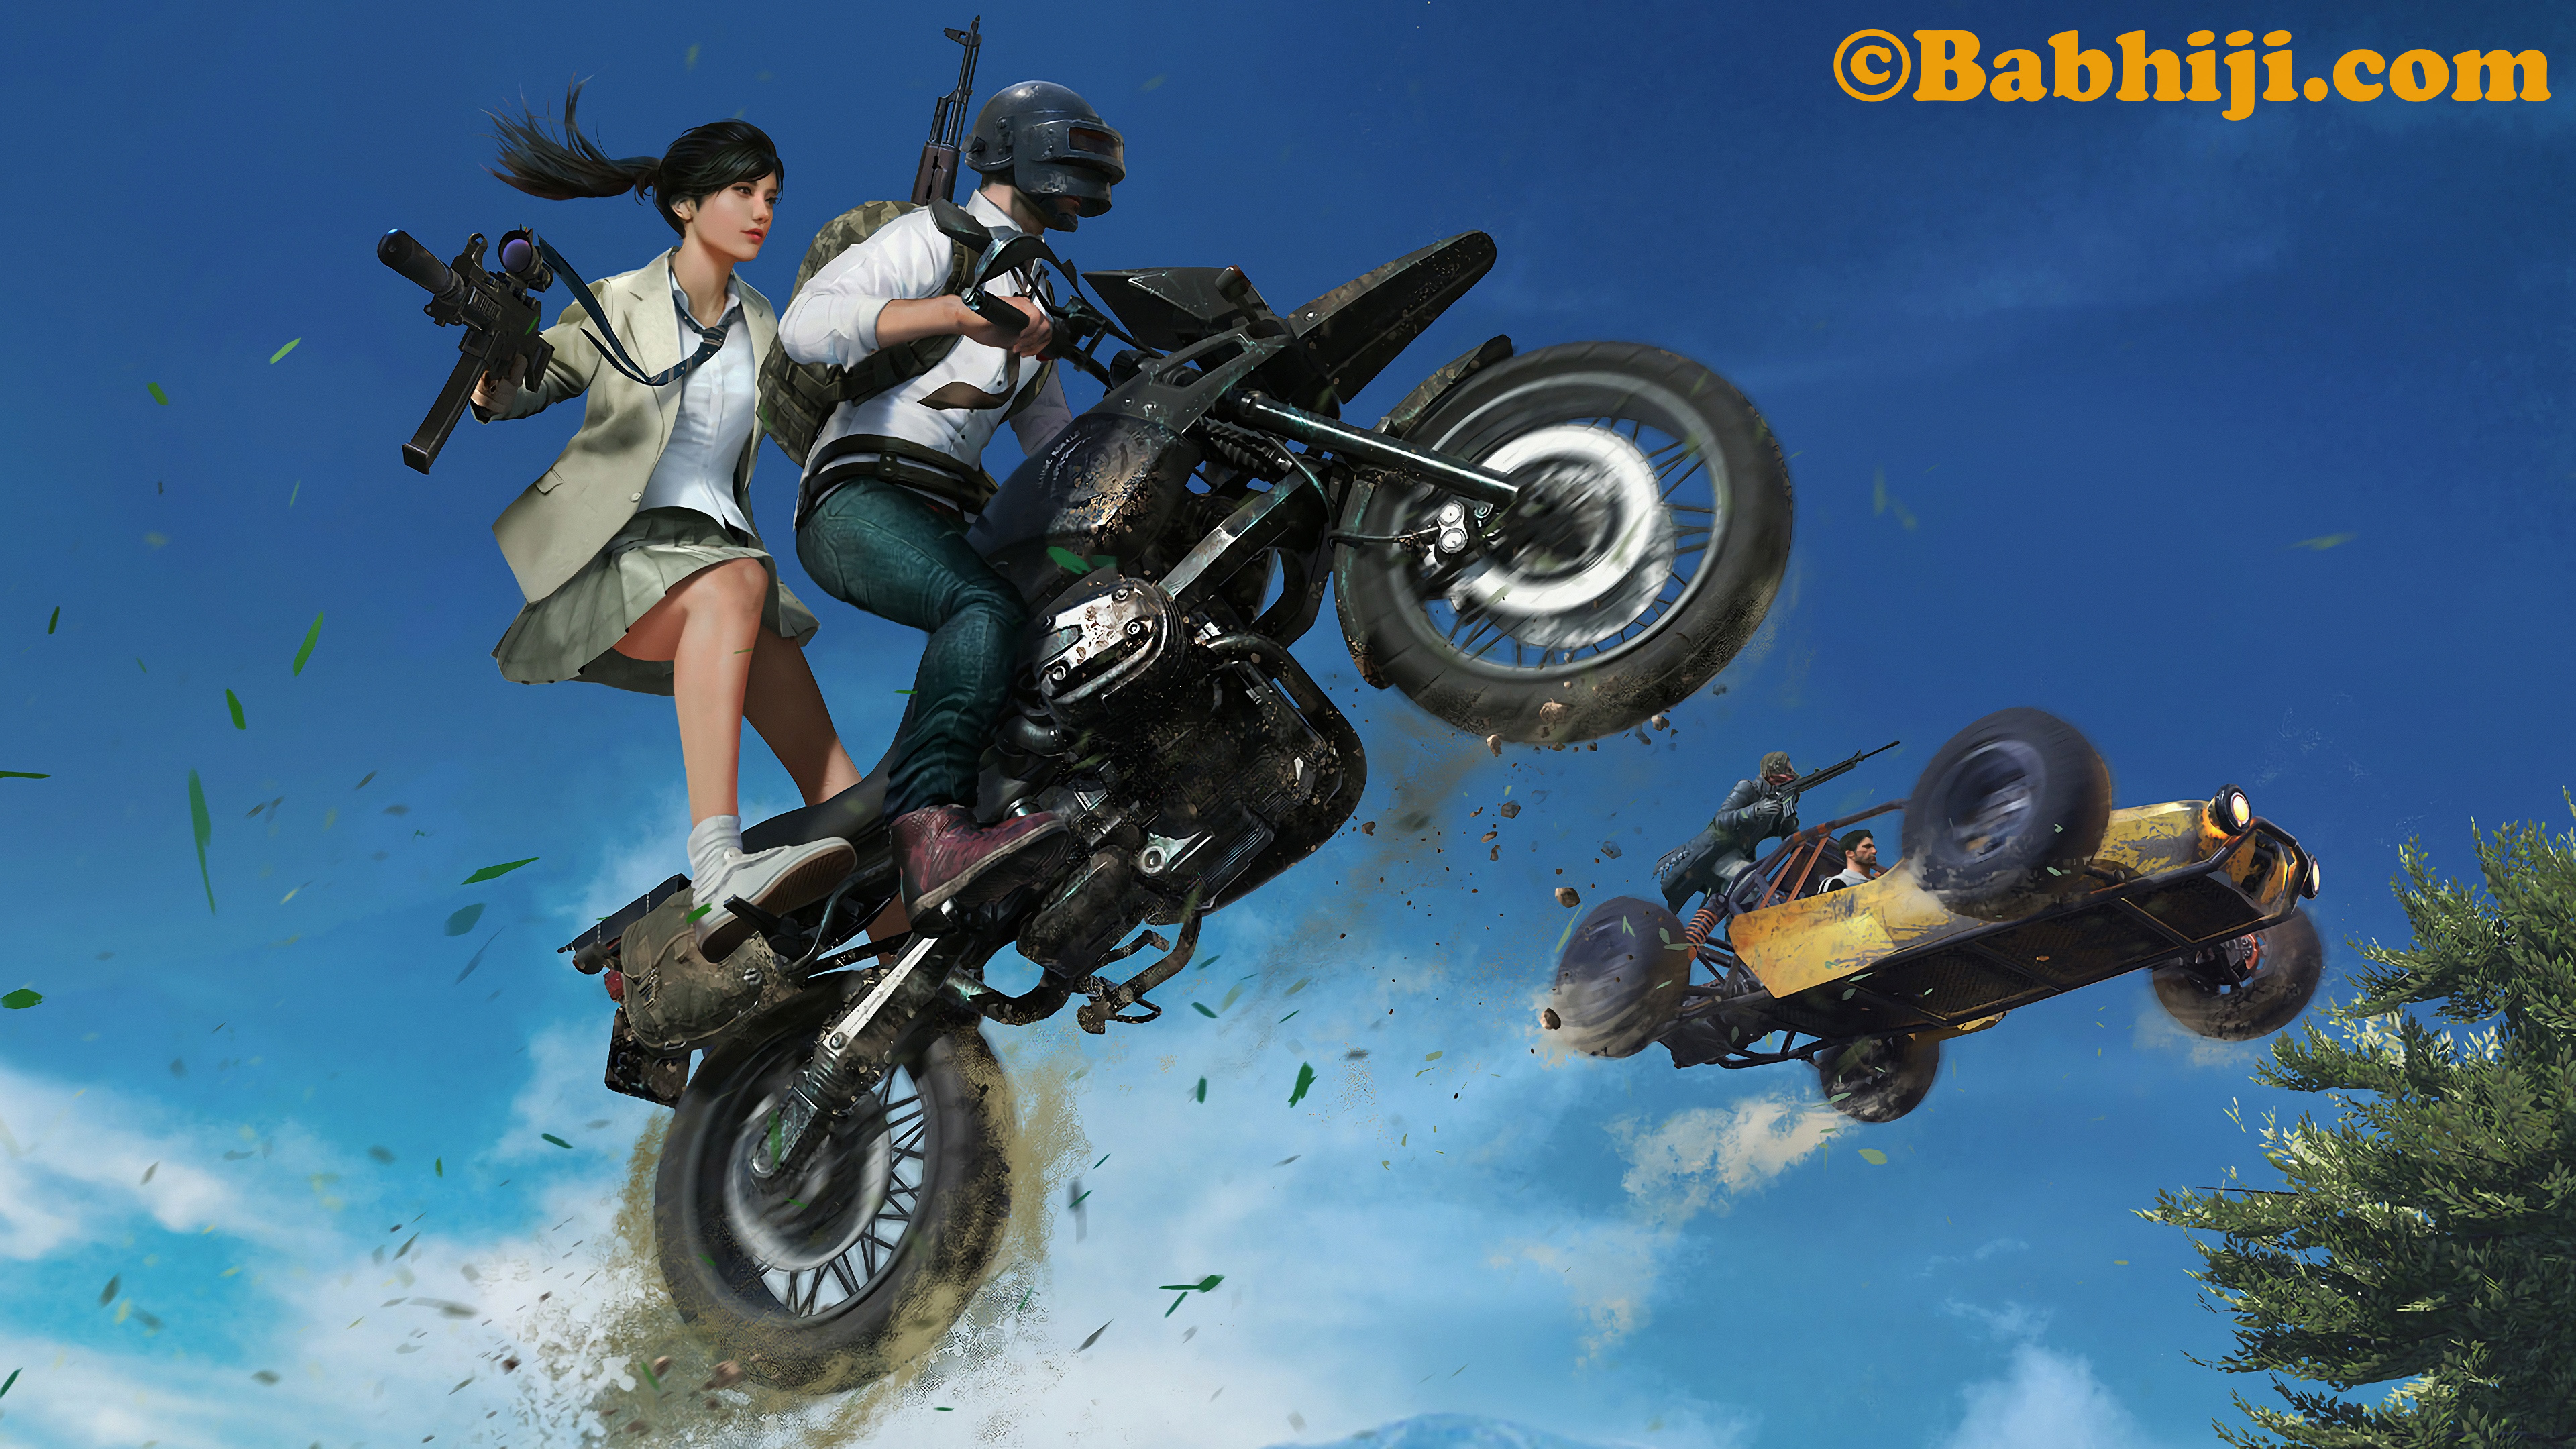 PUBG Mobile 15 Wallpapers